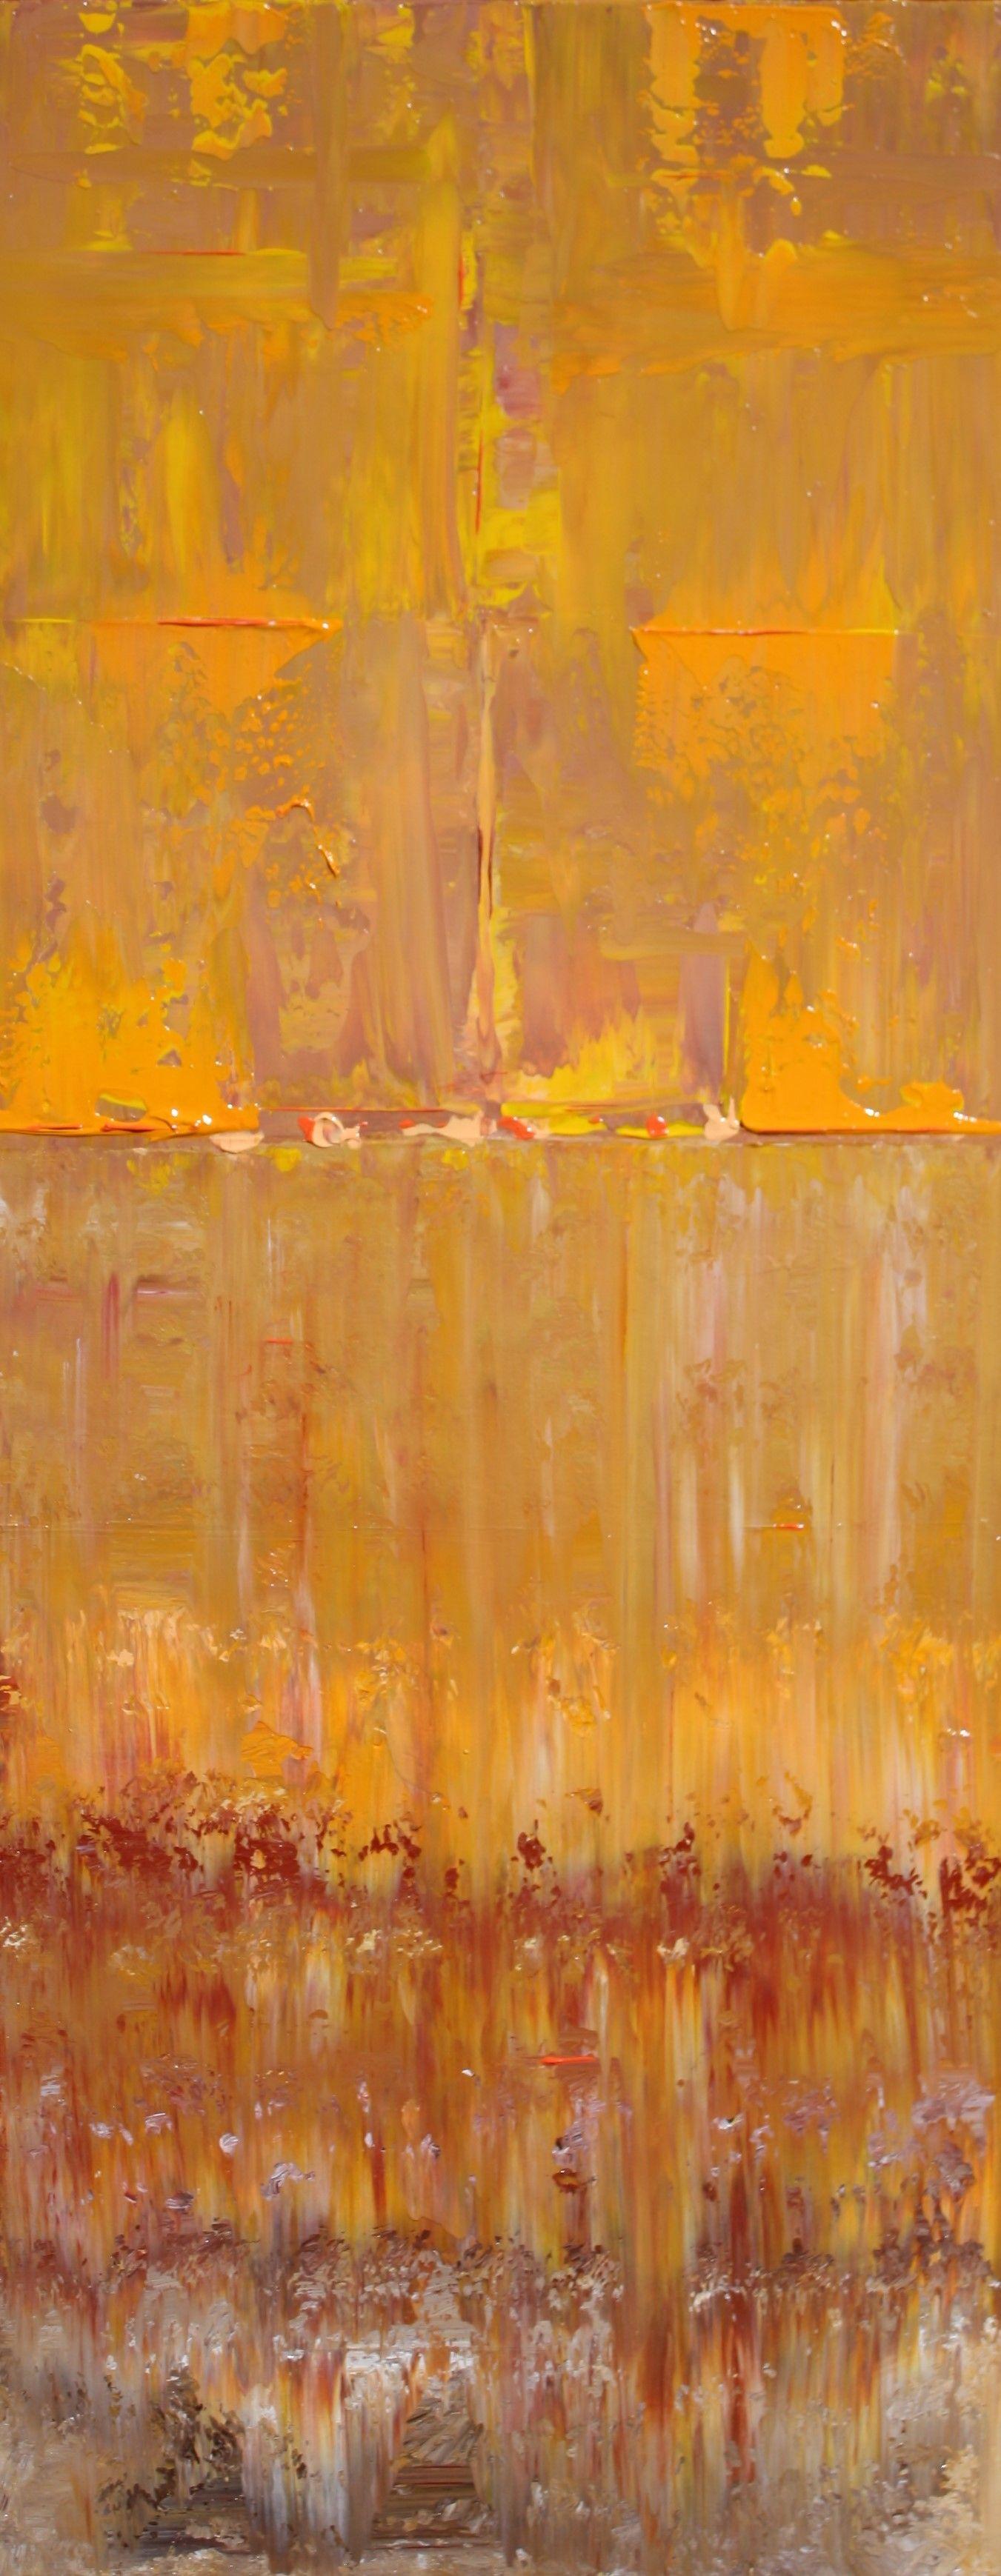 Abstract Autumn Concept, Painting, Acrylic on Canvas 2